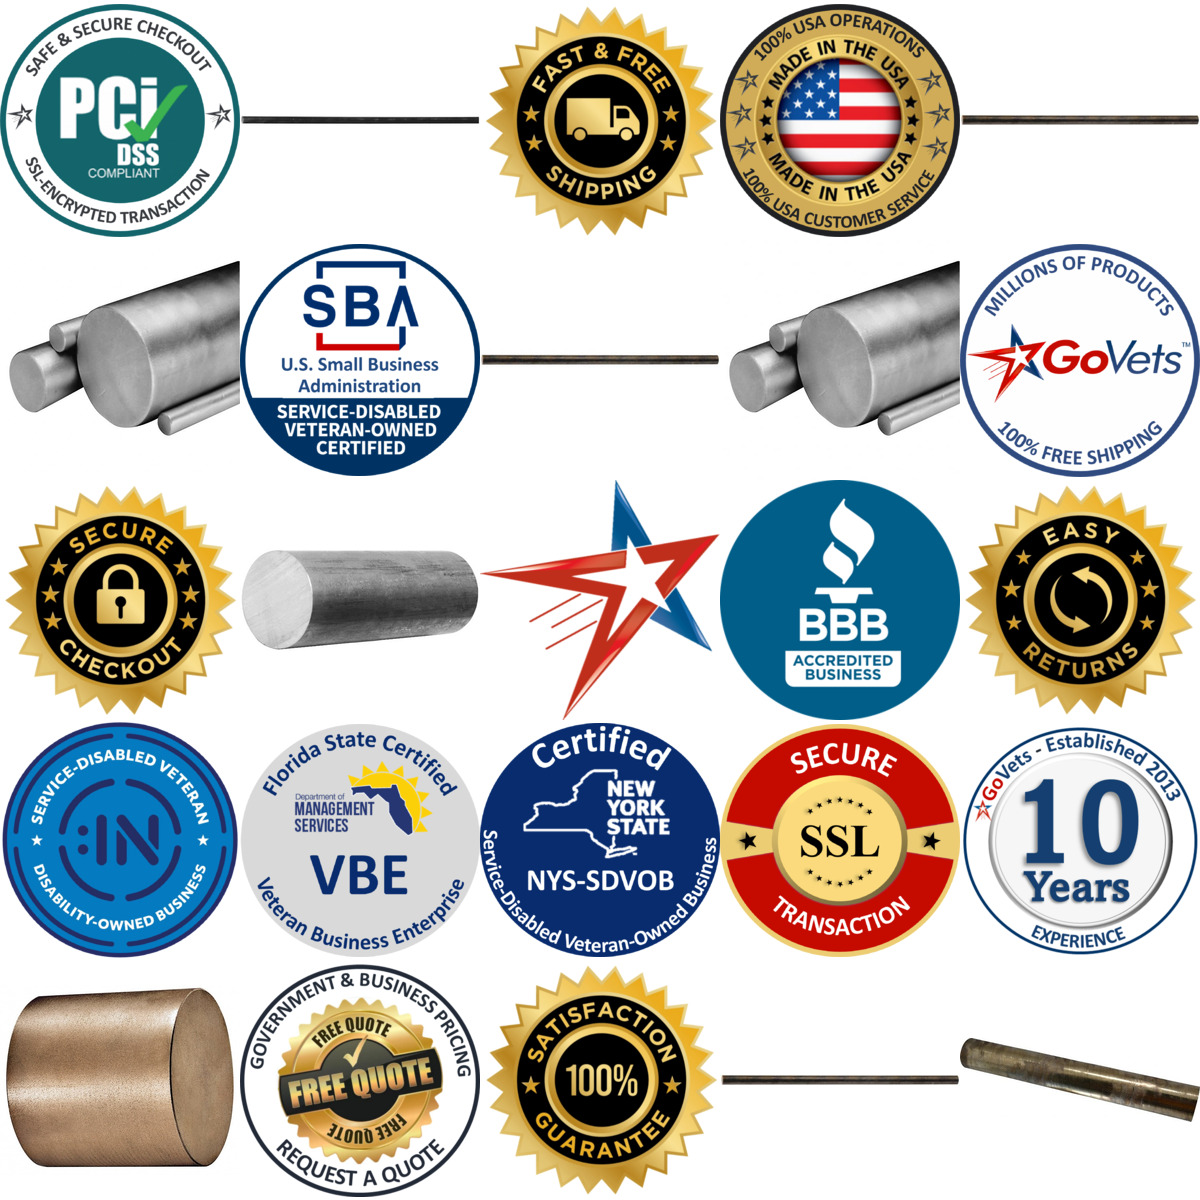 A selection of Bronze Round Rods products on GoVets